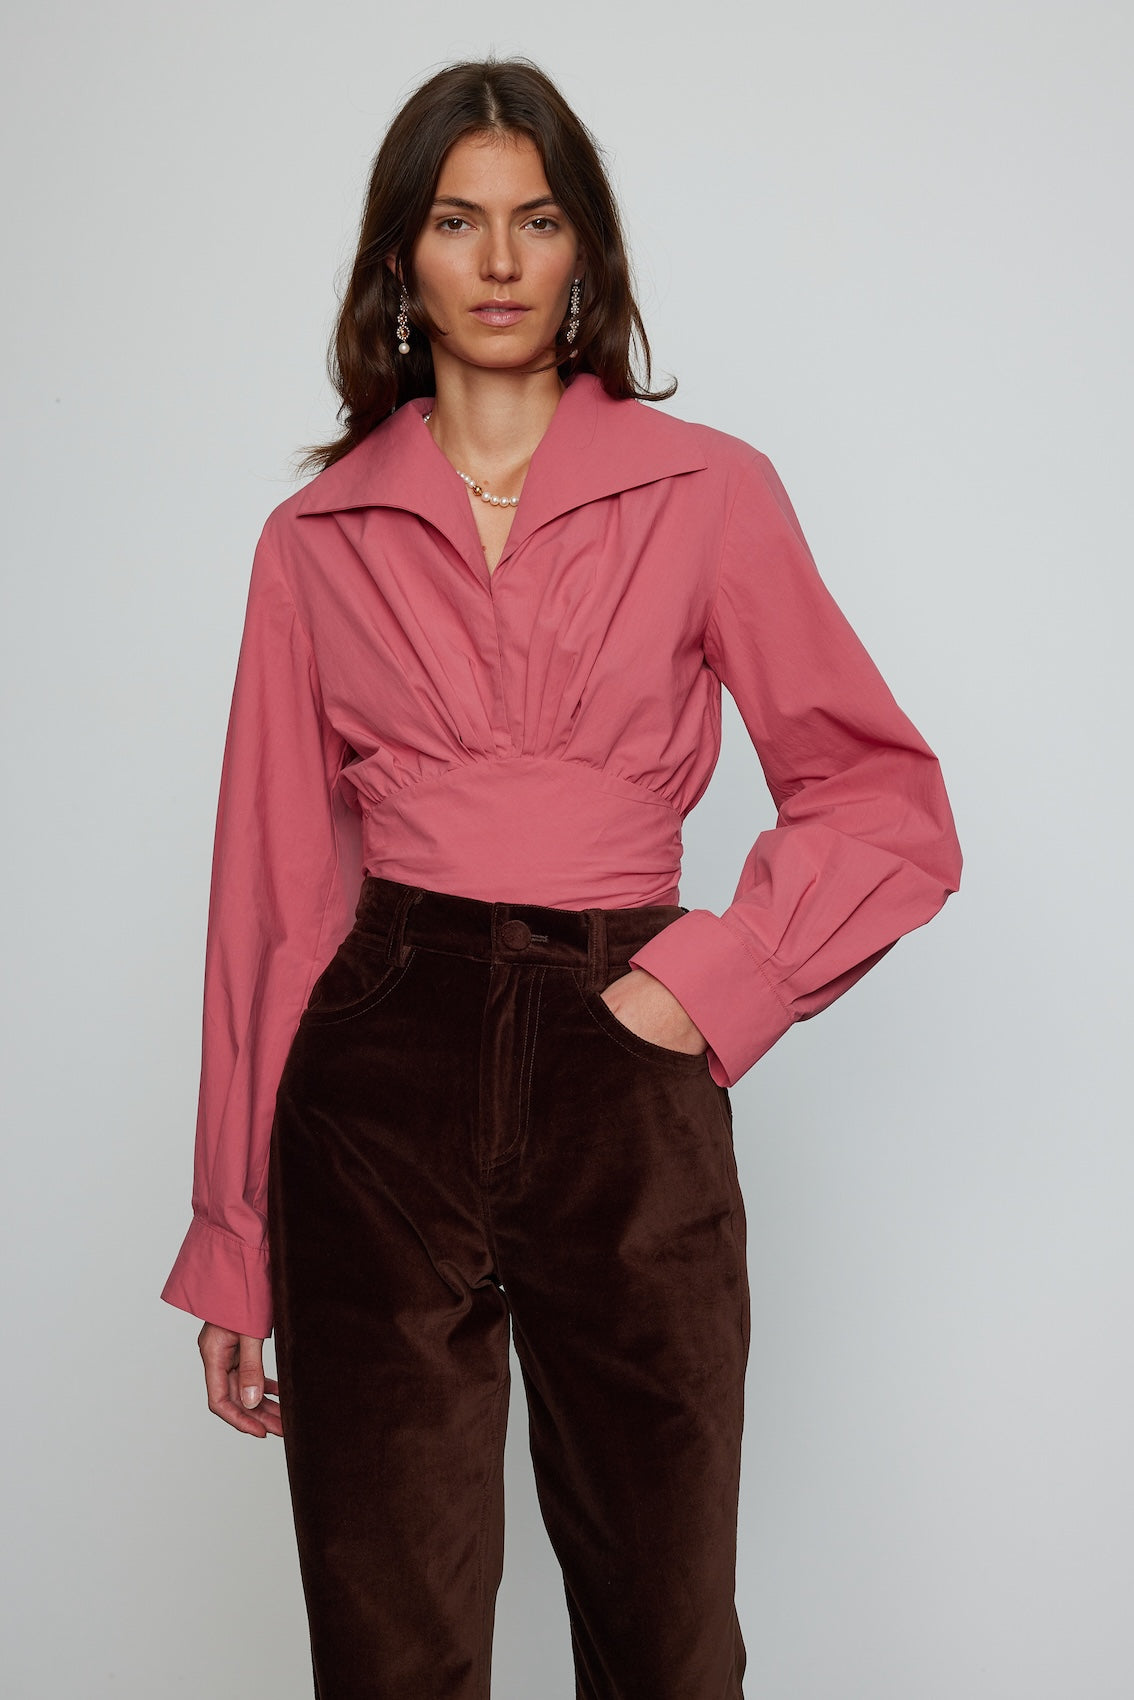 Caro Editions Nikita Blouse. This shirt features a fitted waist and signature Caro Editions sleeves with cuffs, inspired by the party vibe of the 70s.  Style it on its own or with a top underneath.  Material: 100% Cotton